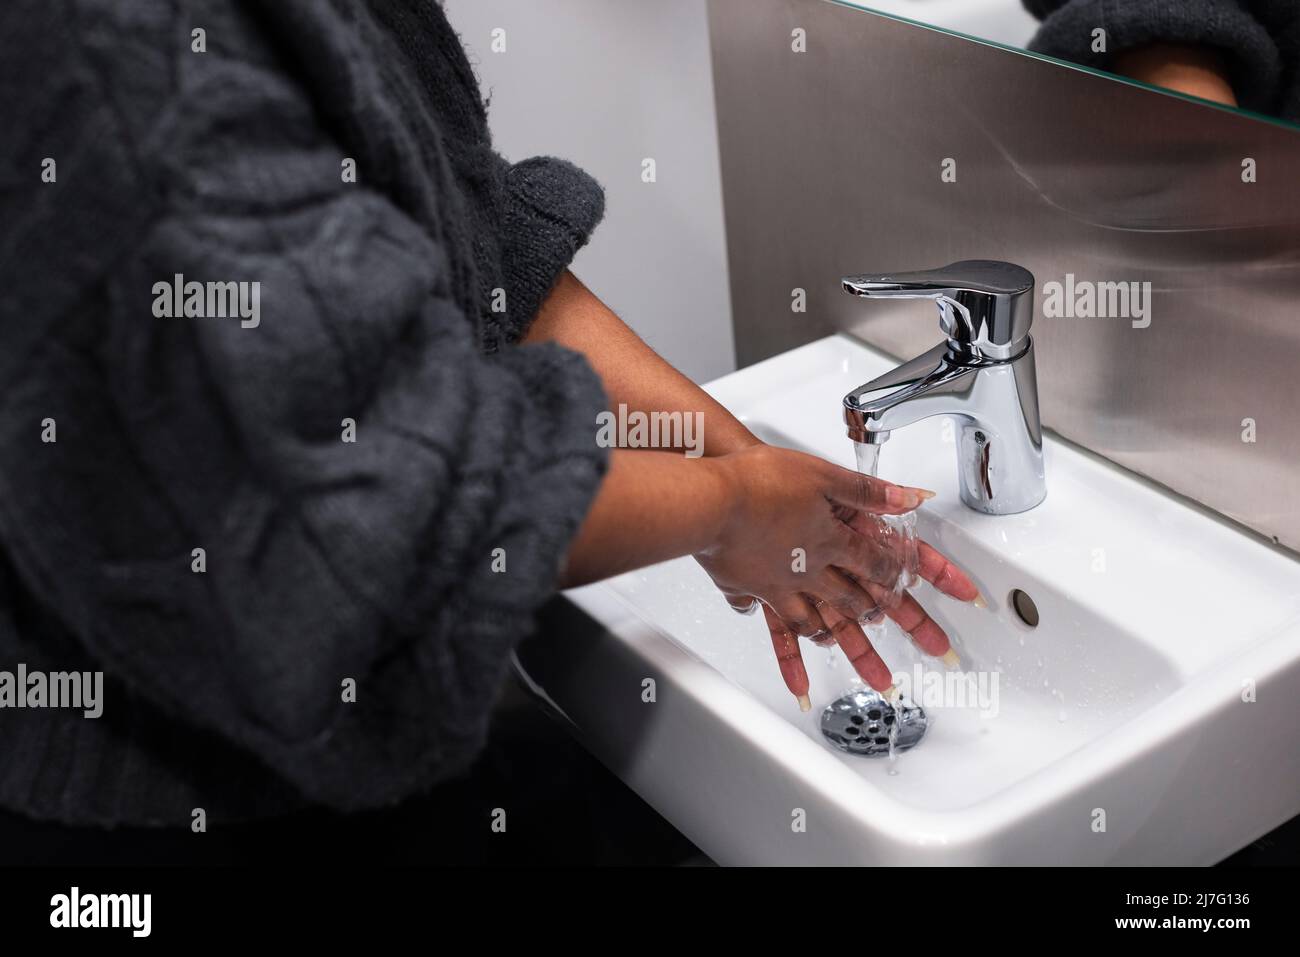 Mid section of woman washing hands Banque D'Images